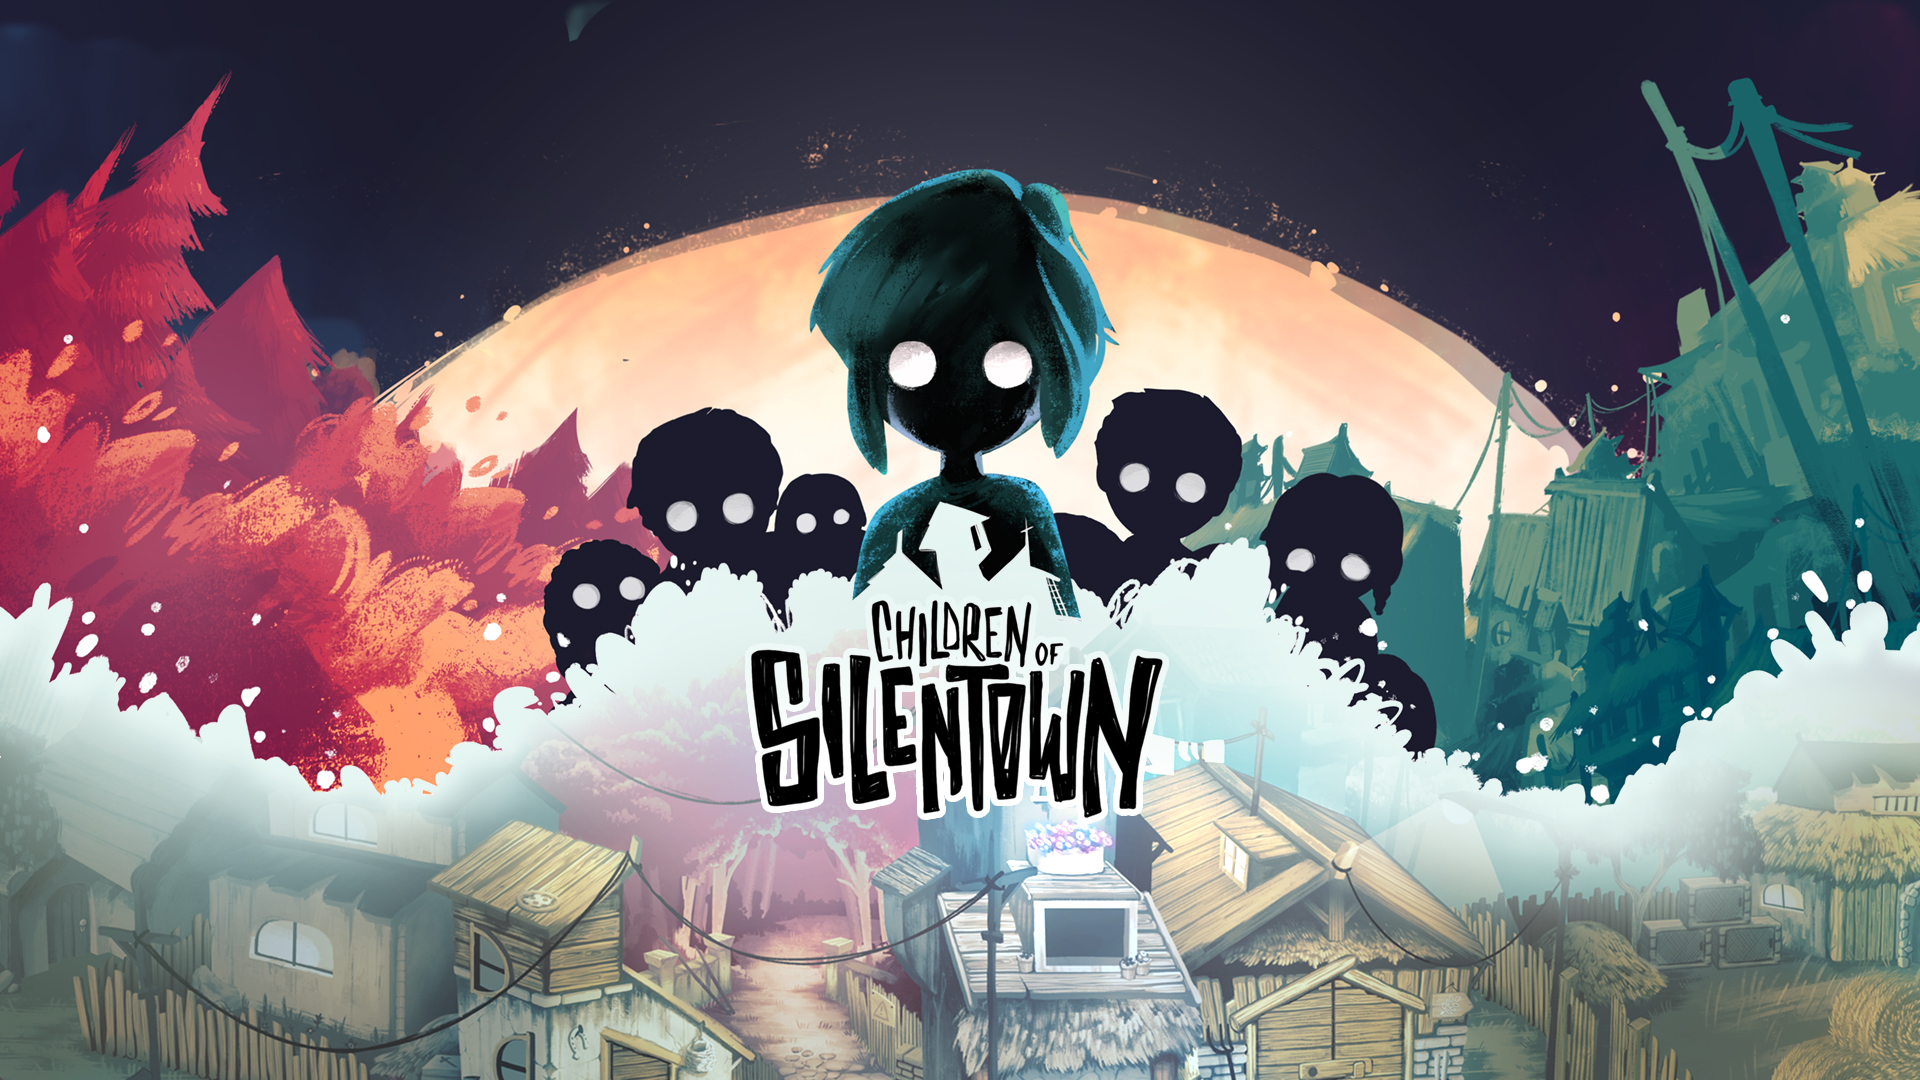 The key art for Children of Silentown, featuring the logo, a handful of glowy-eyed silouettes, and a town.